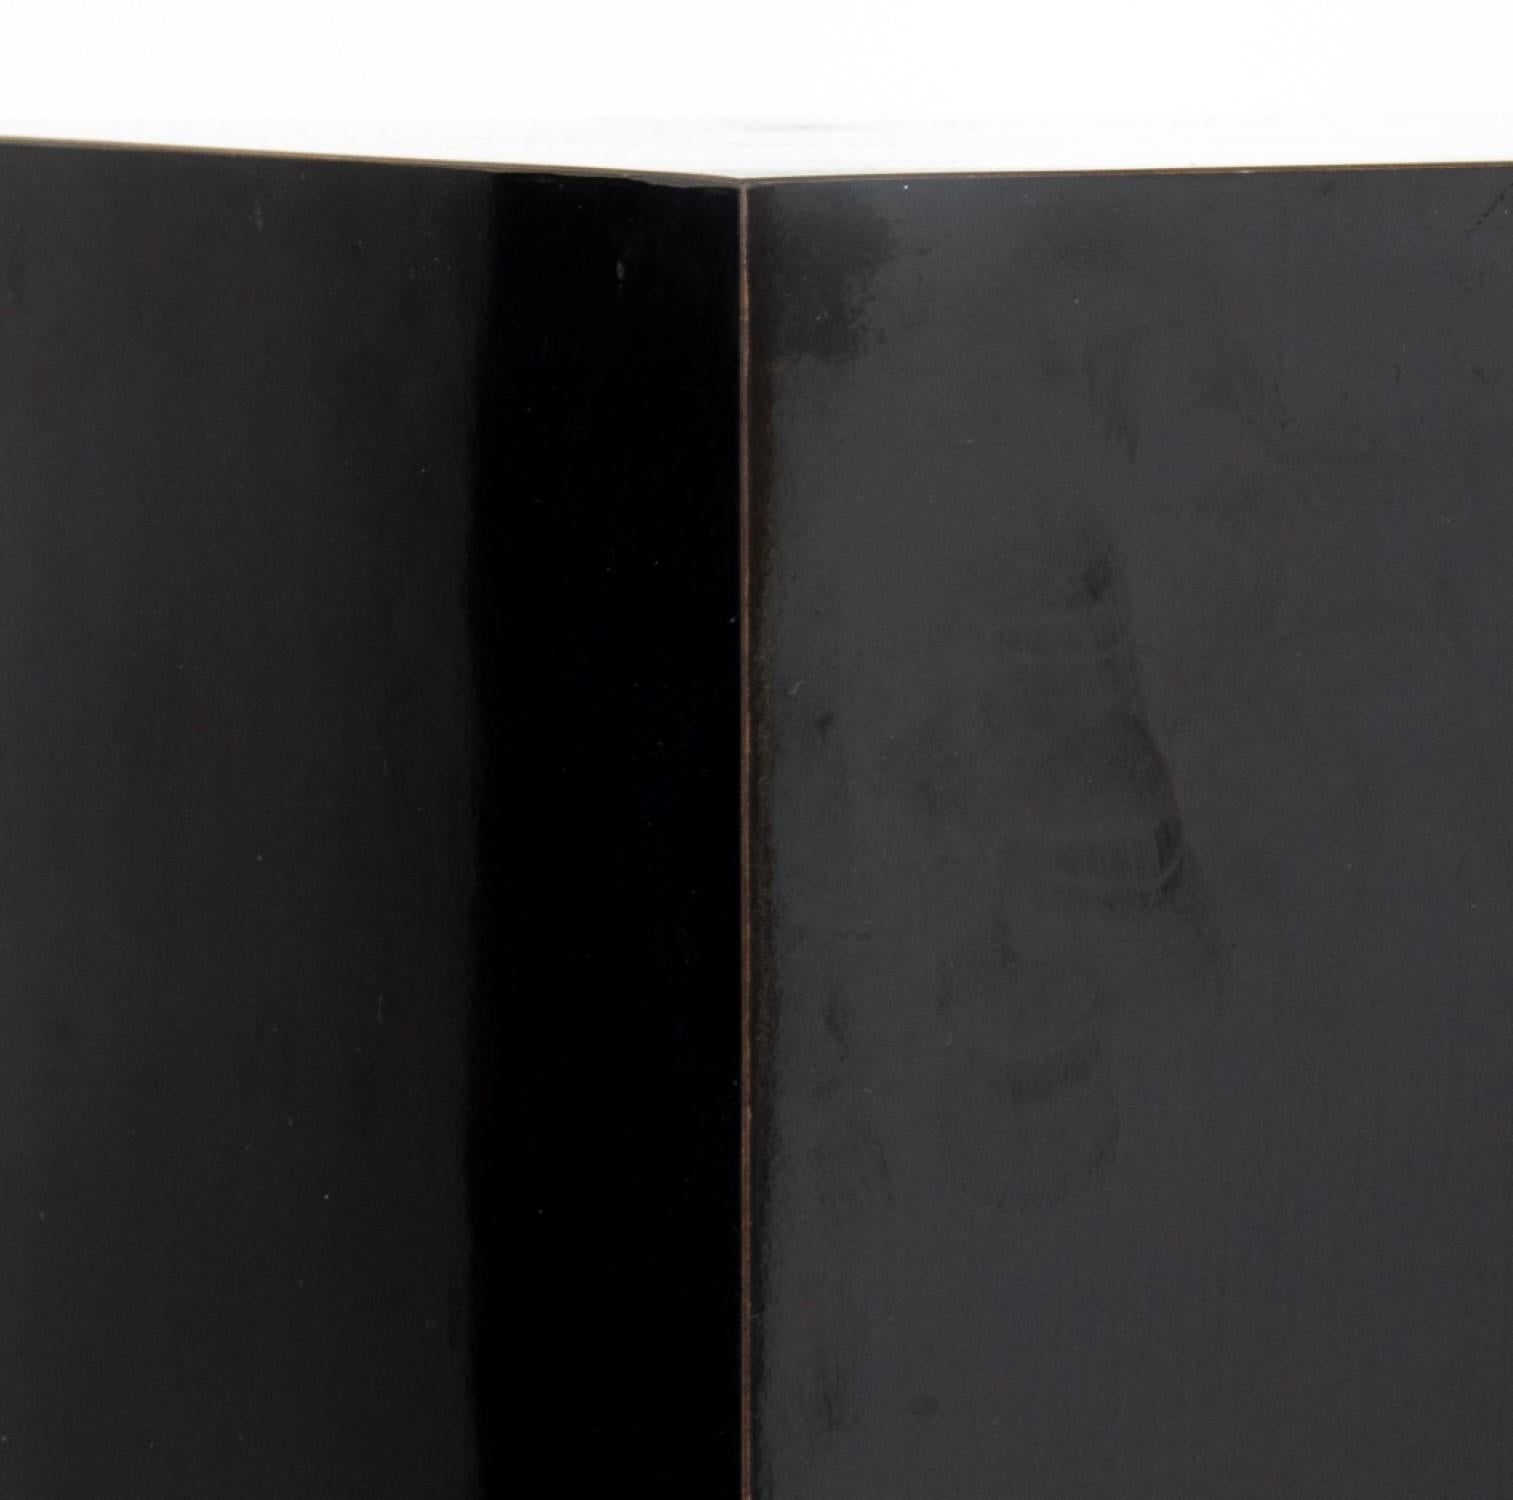 The set of five black lacquered composite wood rectangular pedestal stands,

 with the largest stand measuring 30.5